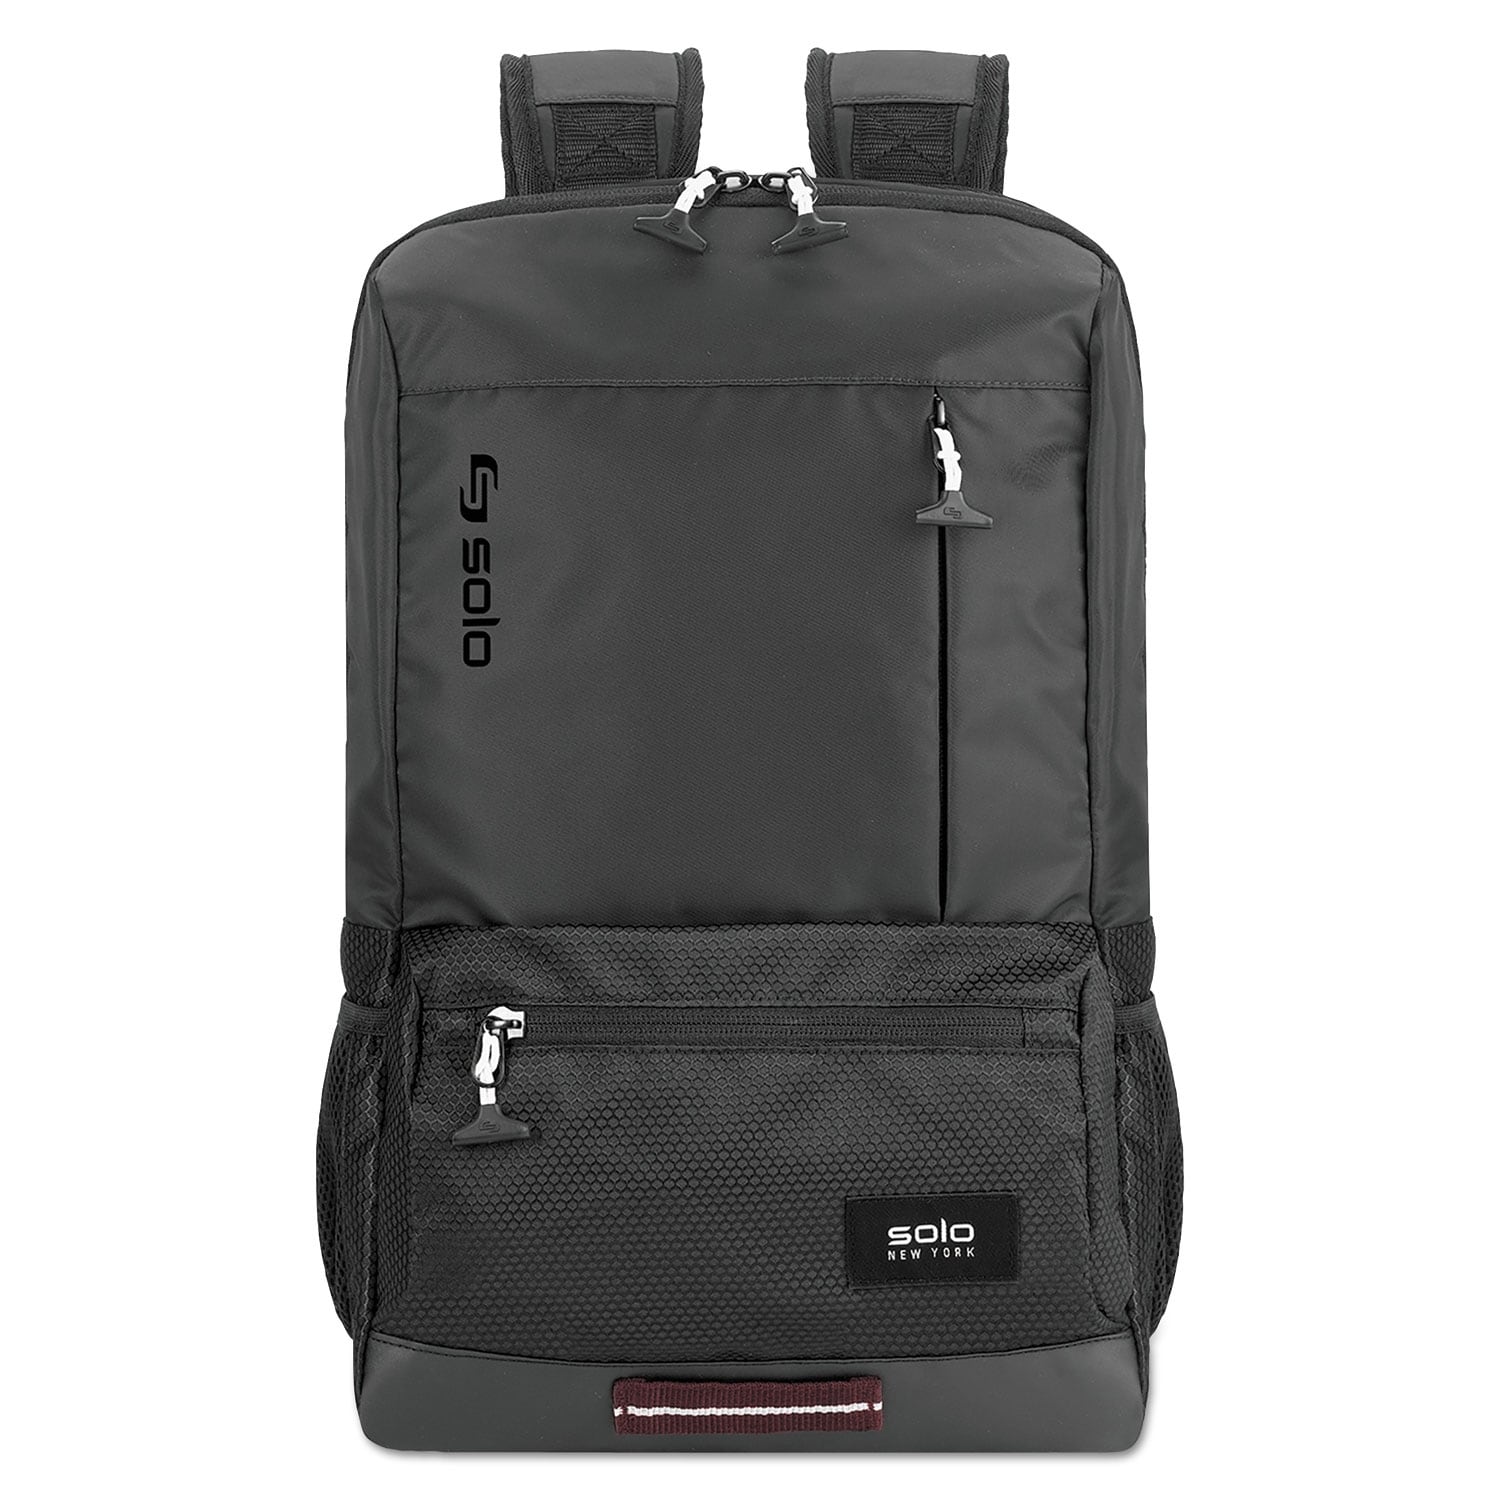 Draft Backpack Fits Devices Up to 15.6